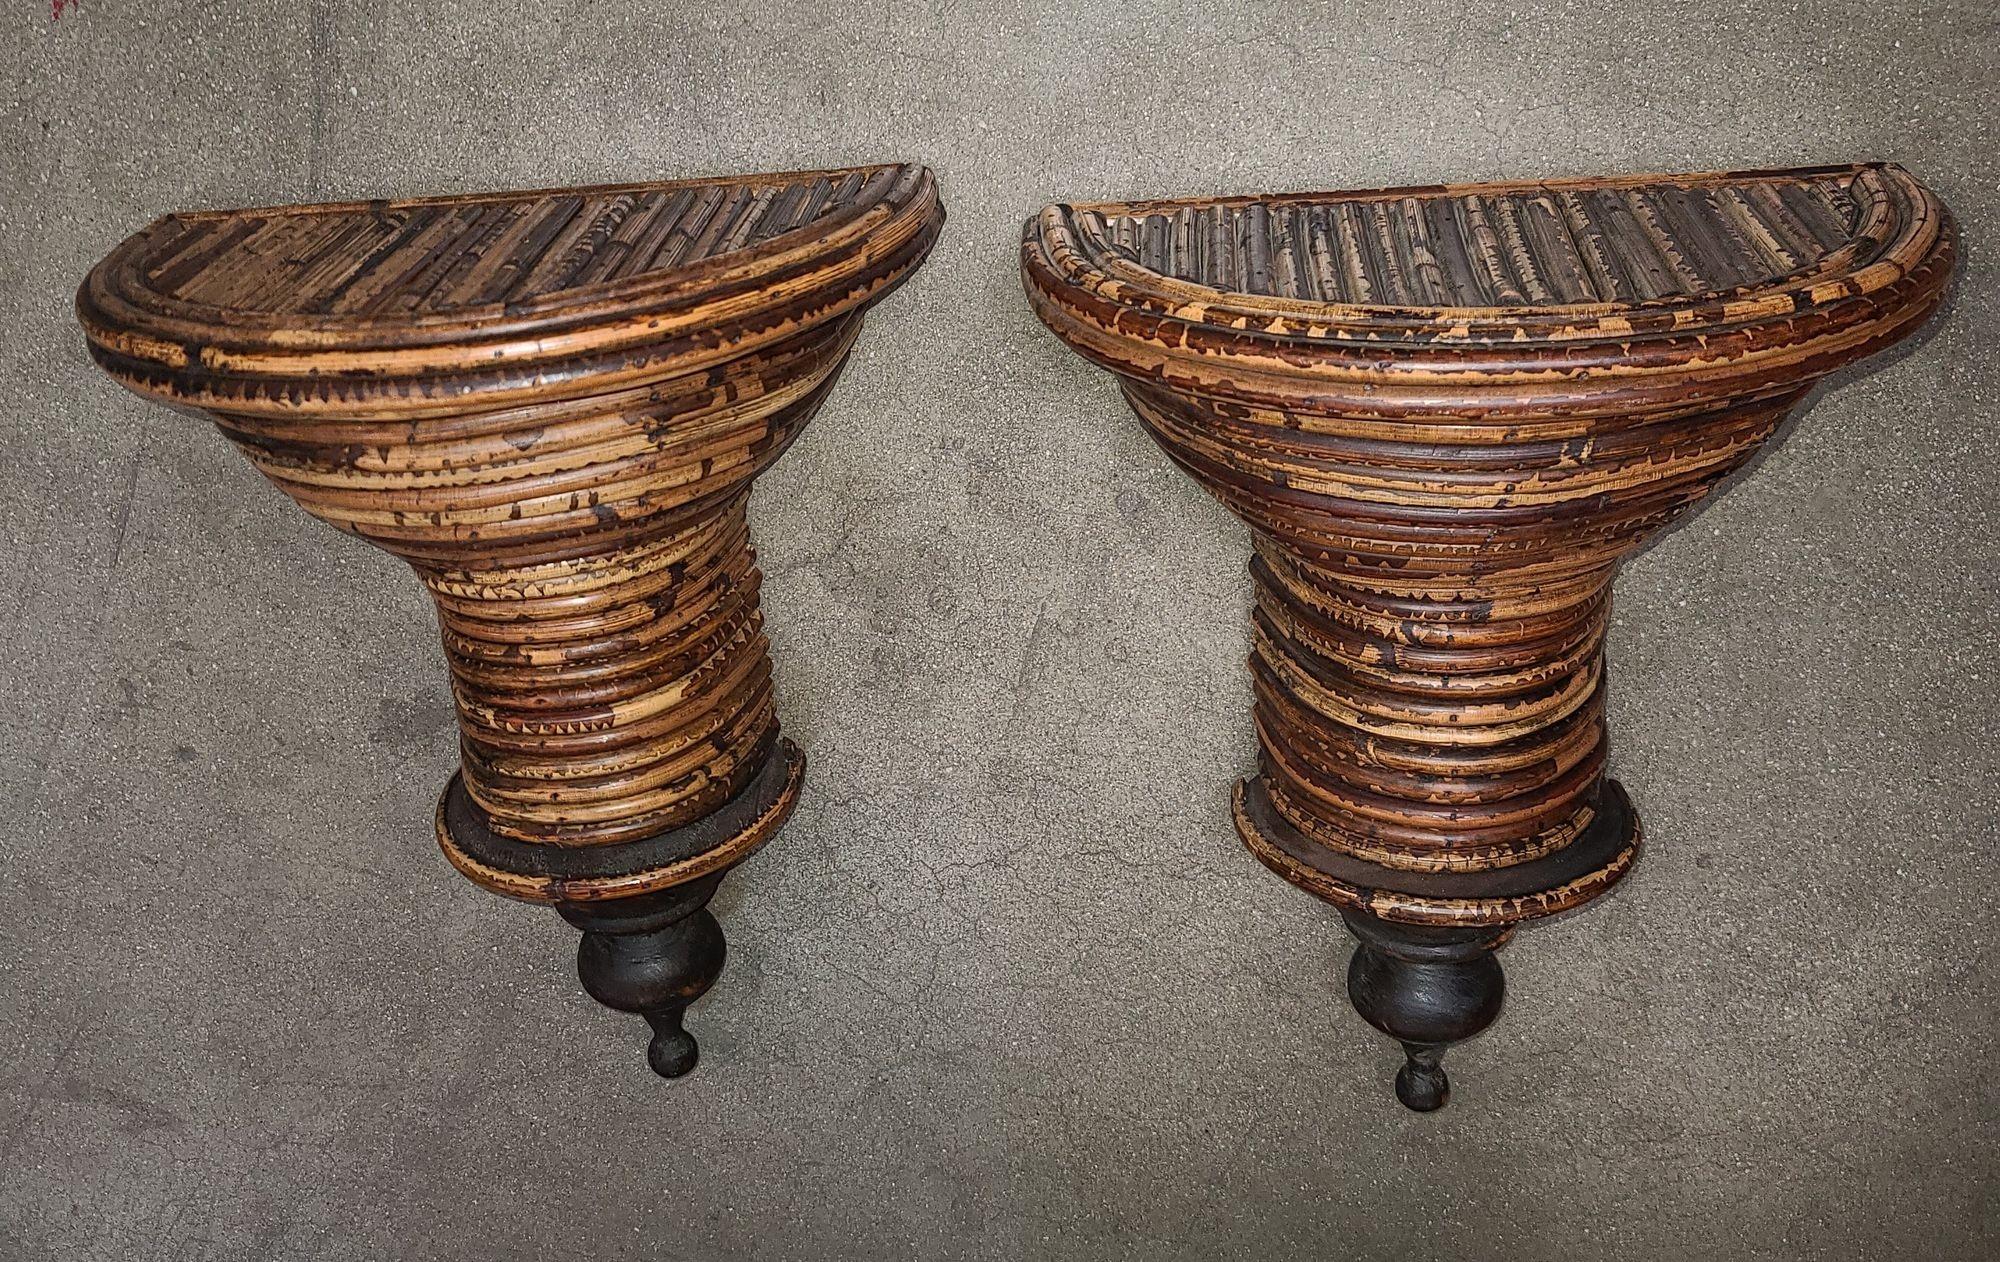 Set of 2 pencil reed rattan wall shalf pedestal holders in the style of designer Gabrielle Crespi who specialized in reed rattan decor. Timeless chic with a boho flair.
Dimensions:
Height: 11.5